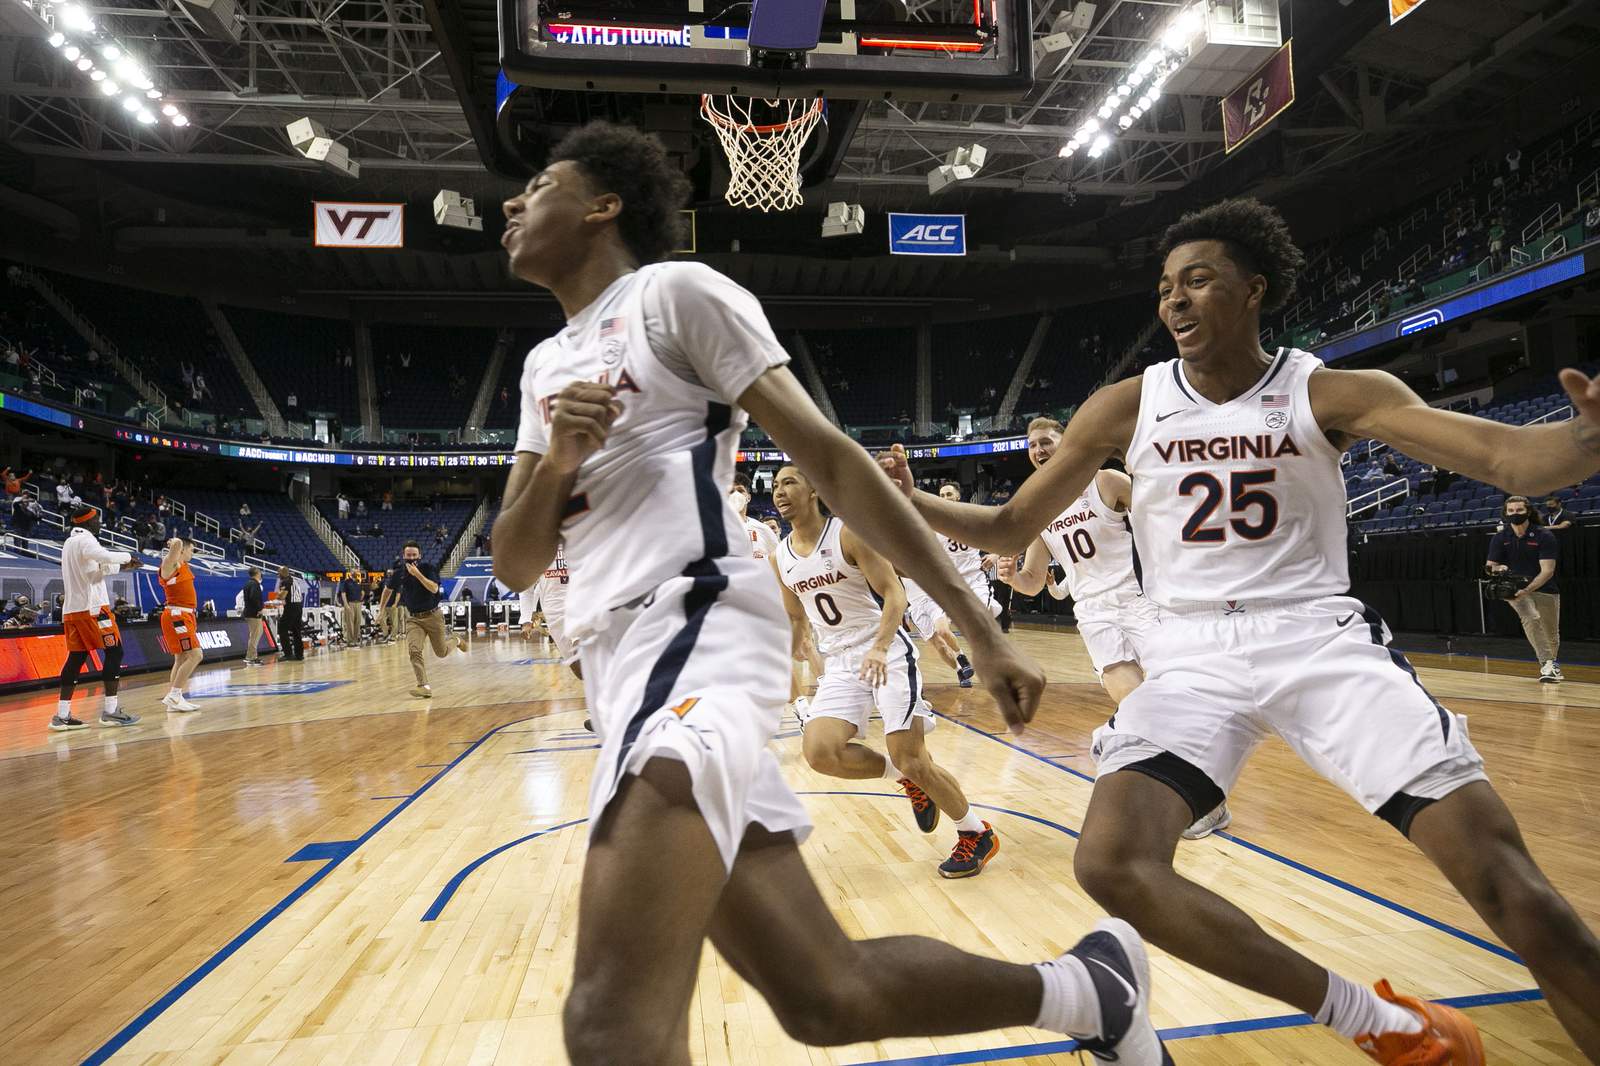 Going dancing: Virginia tabbed as a 4 seed for NCAA Tournament